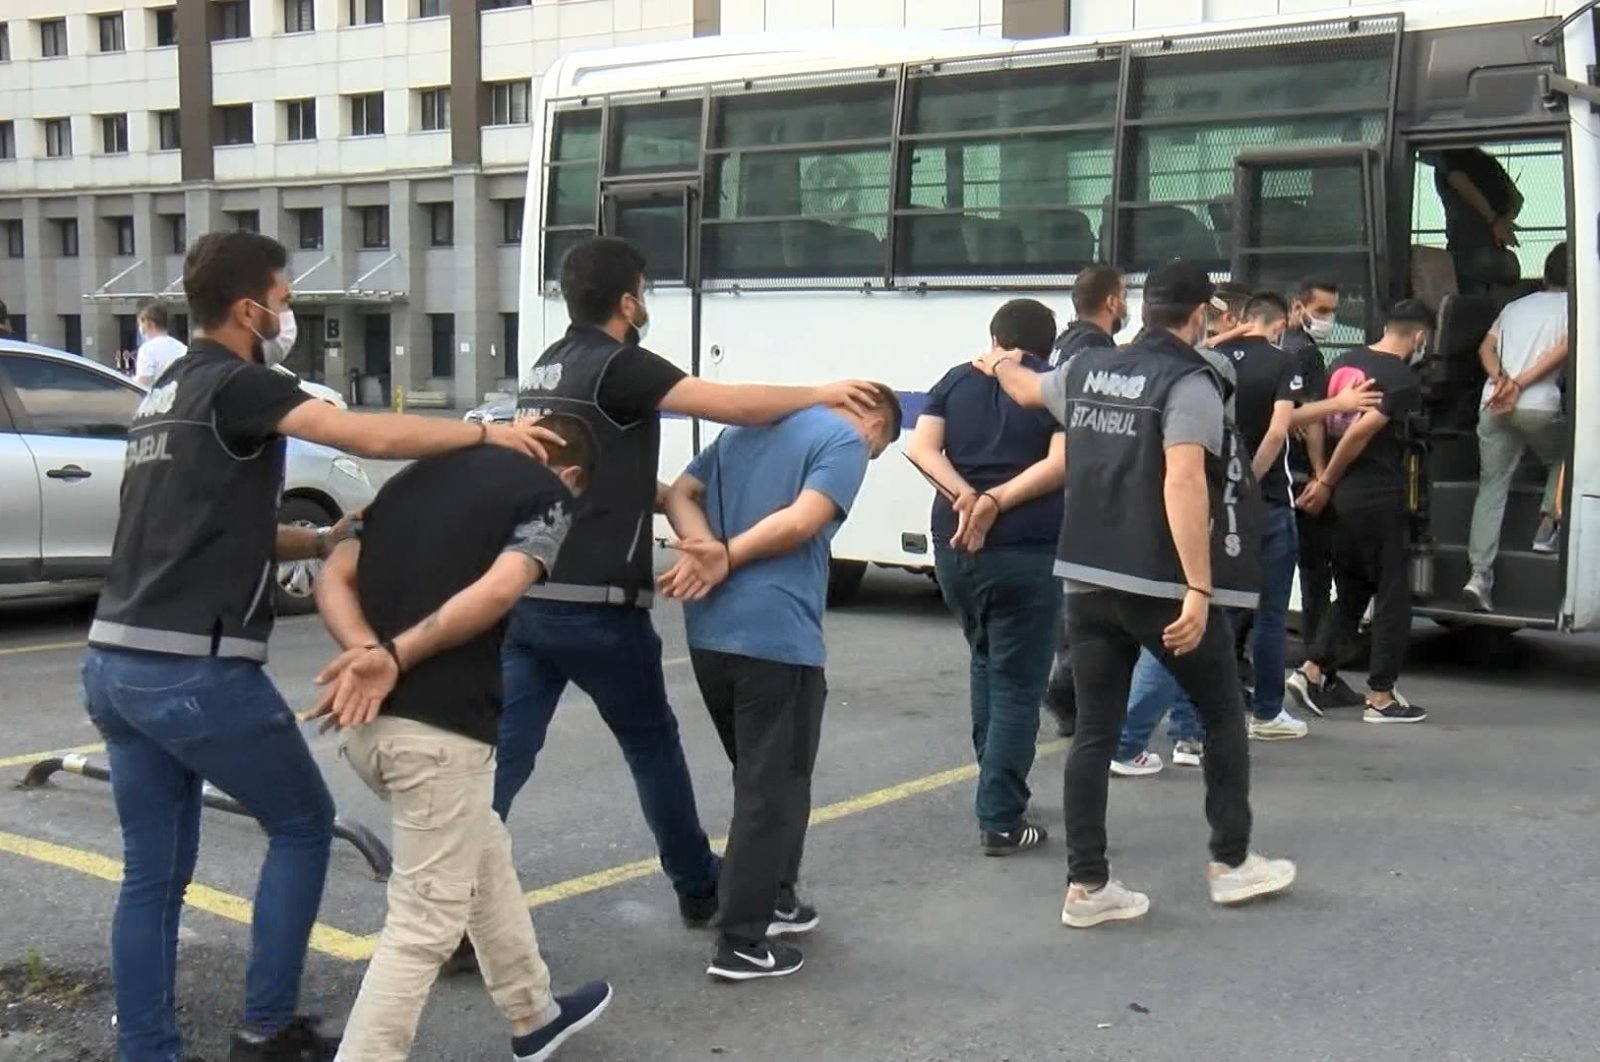 Police officers escort nabbed drug suspects to a bus to transfer them to the court, in Istanbul, Turkey, July 9, 2021. (DHA Photo)